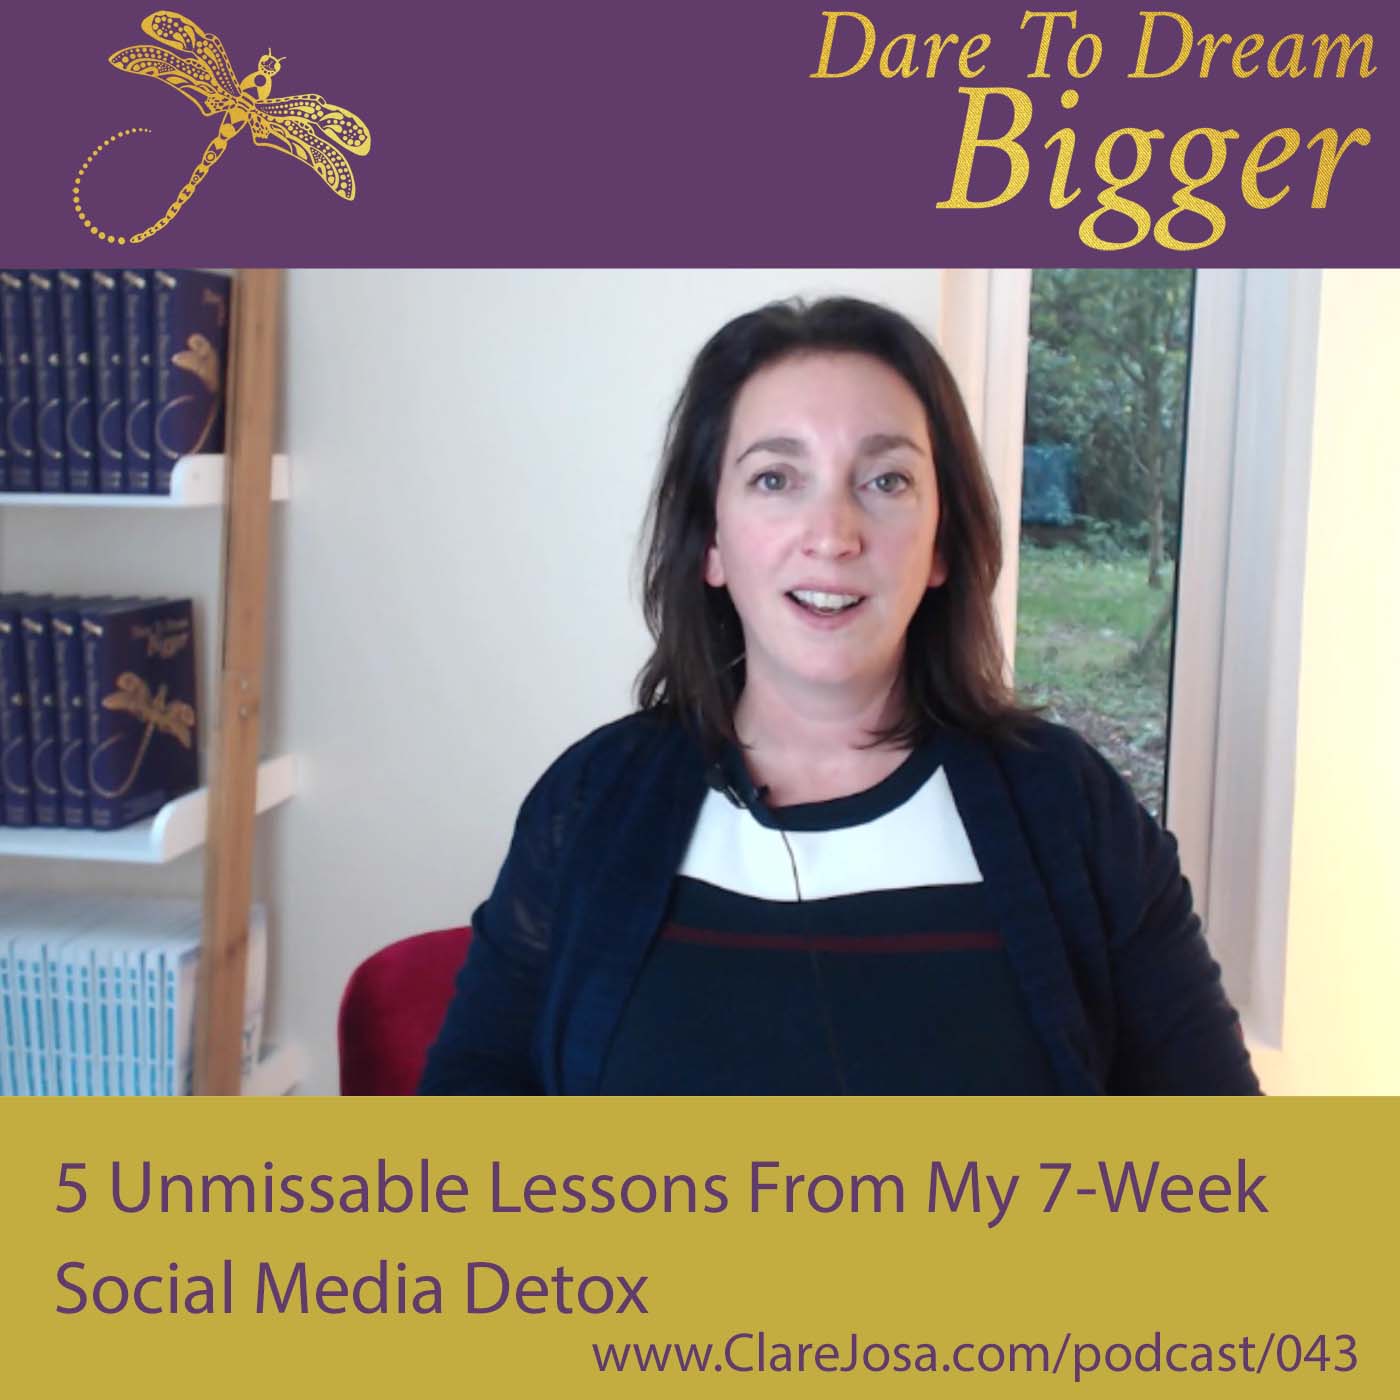 5 Unmissable Lessons From My 7-Week Social Media Detox http://www.clarejosa.com/podcast/043/